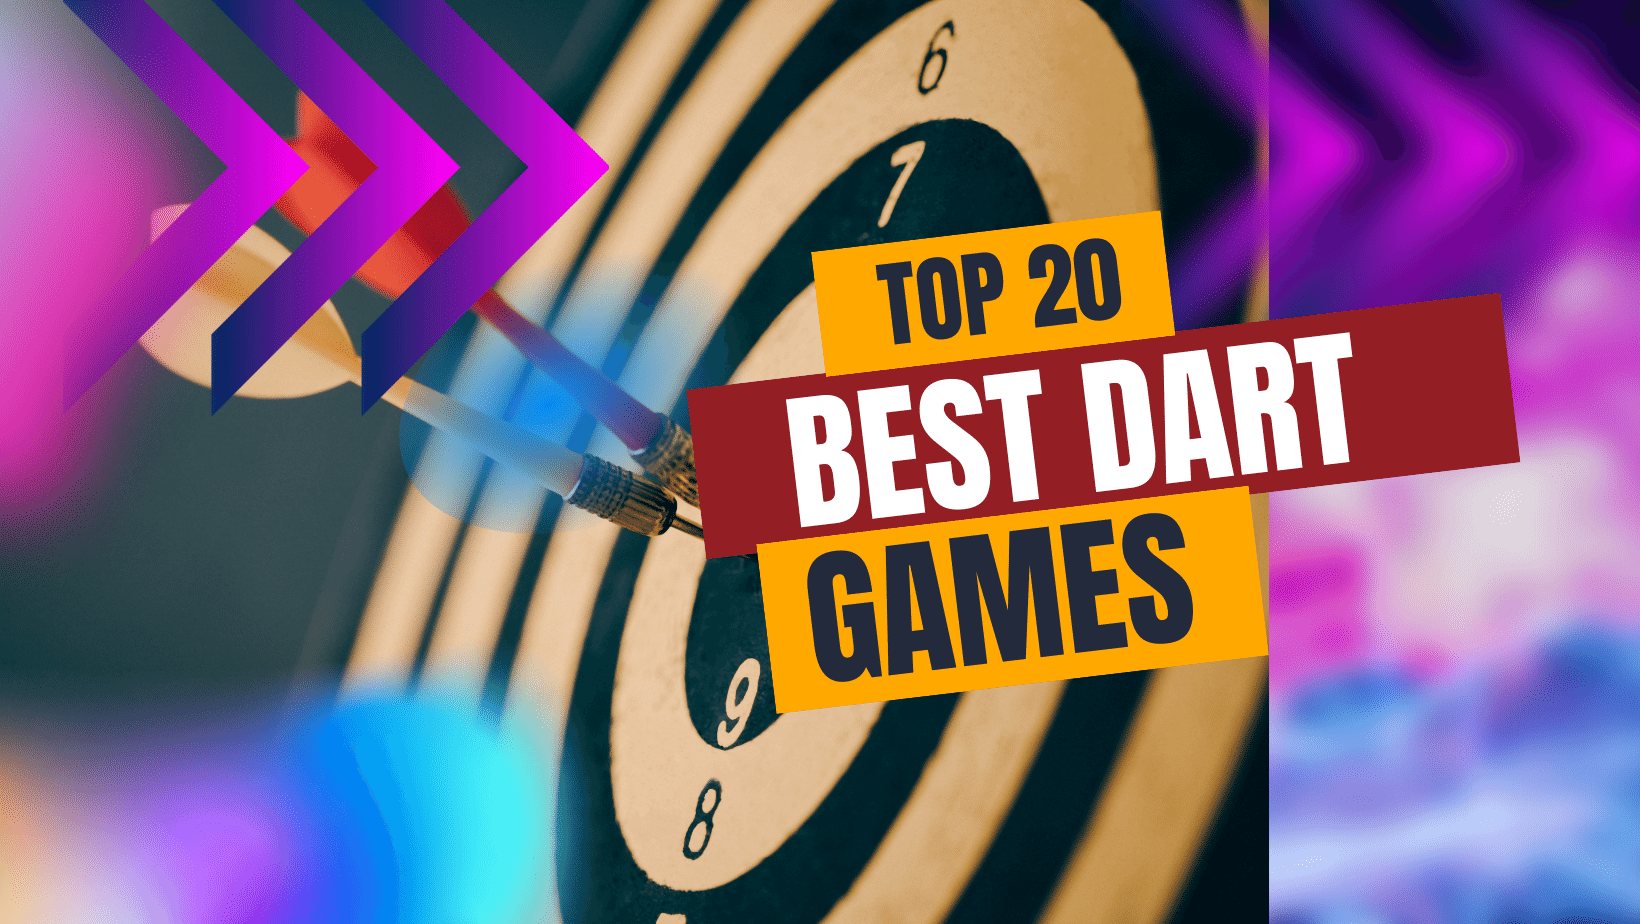 Top 20 Dart Games to play with your friends